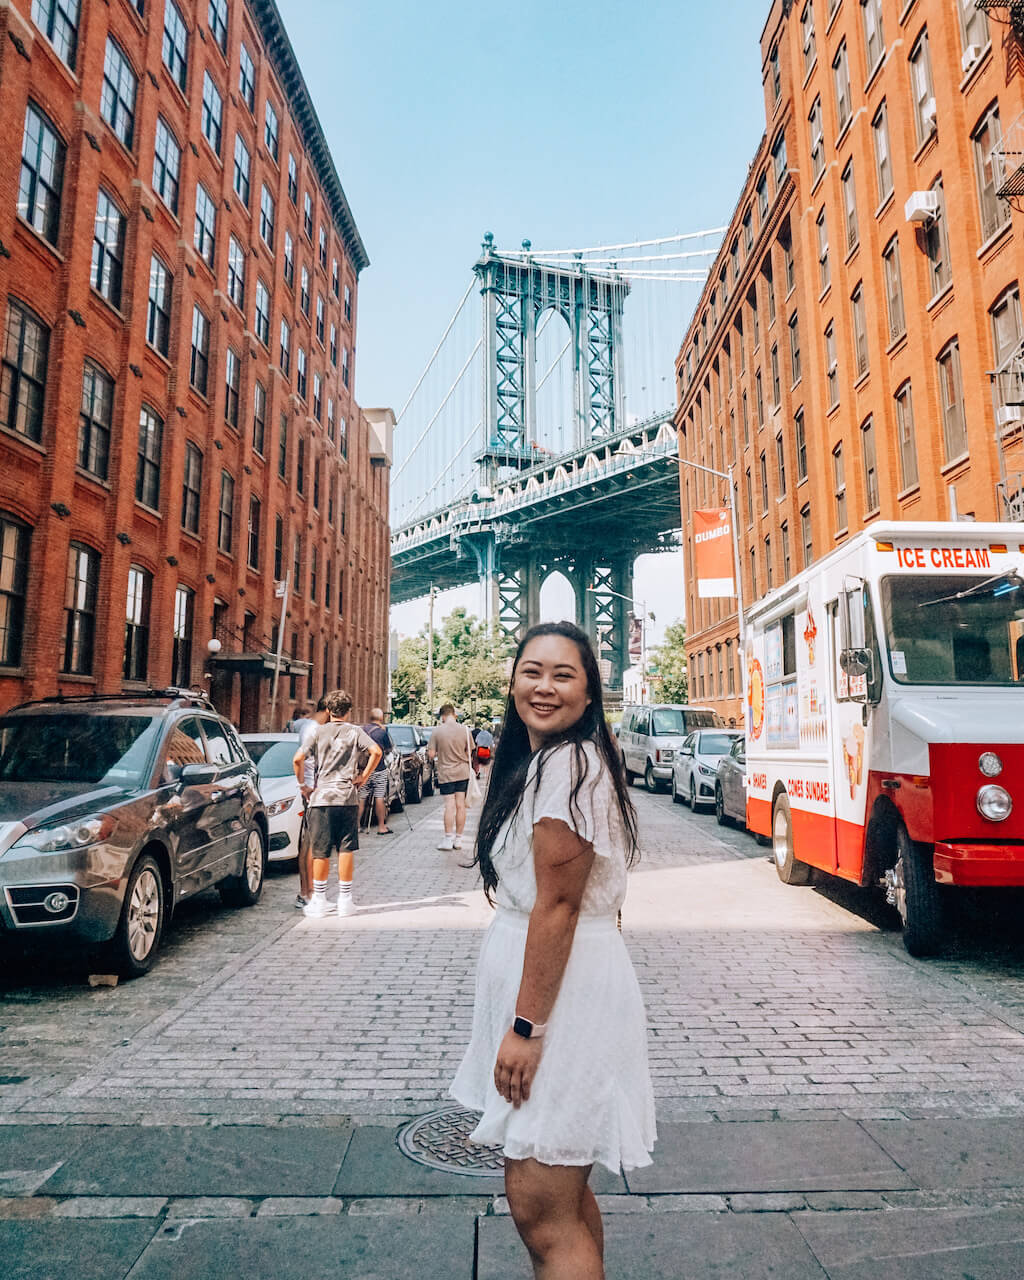 Instagrammable places in NYC: Dumbo